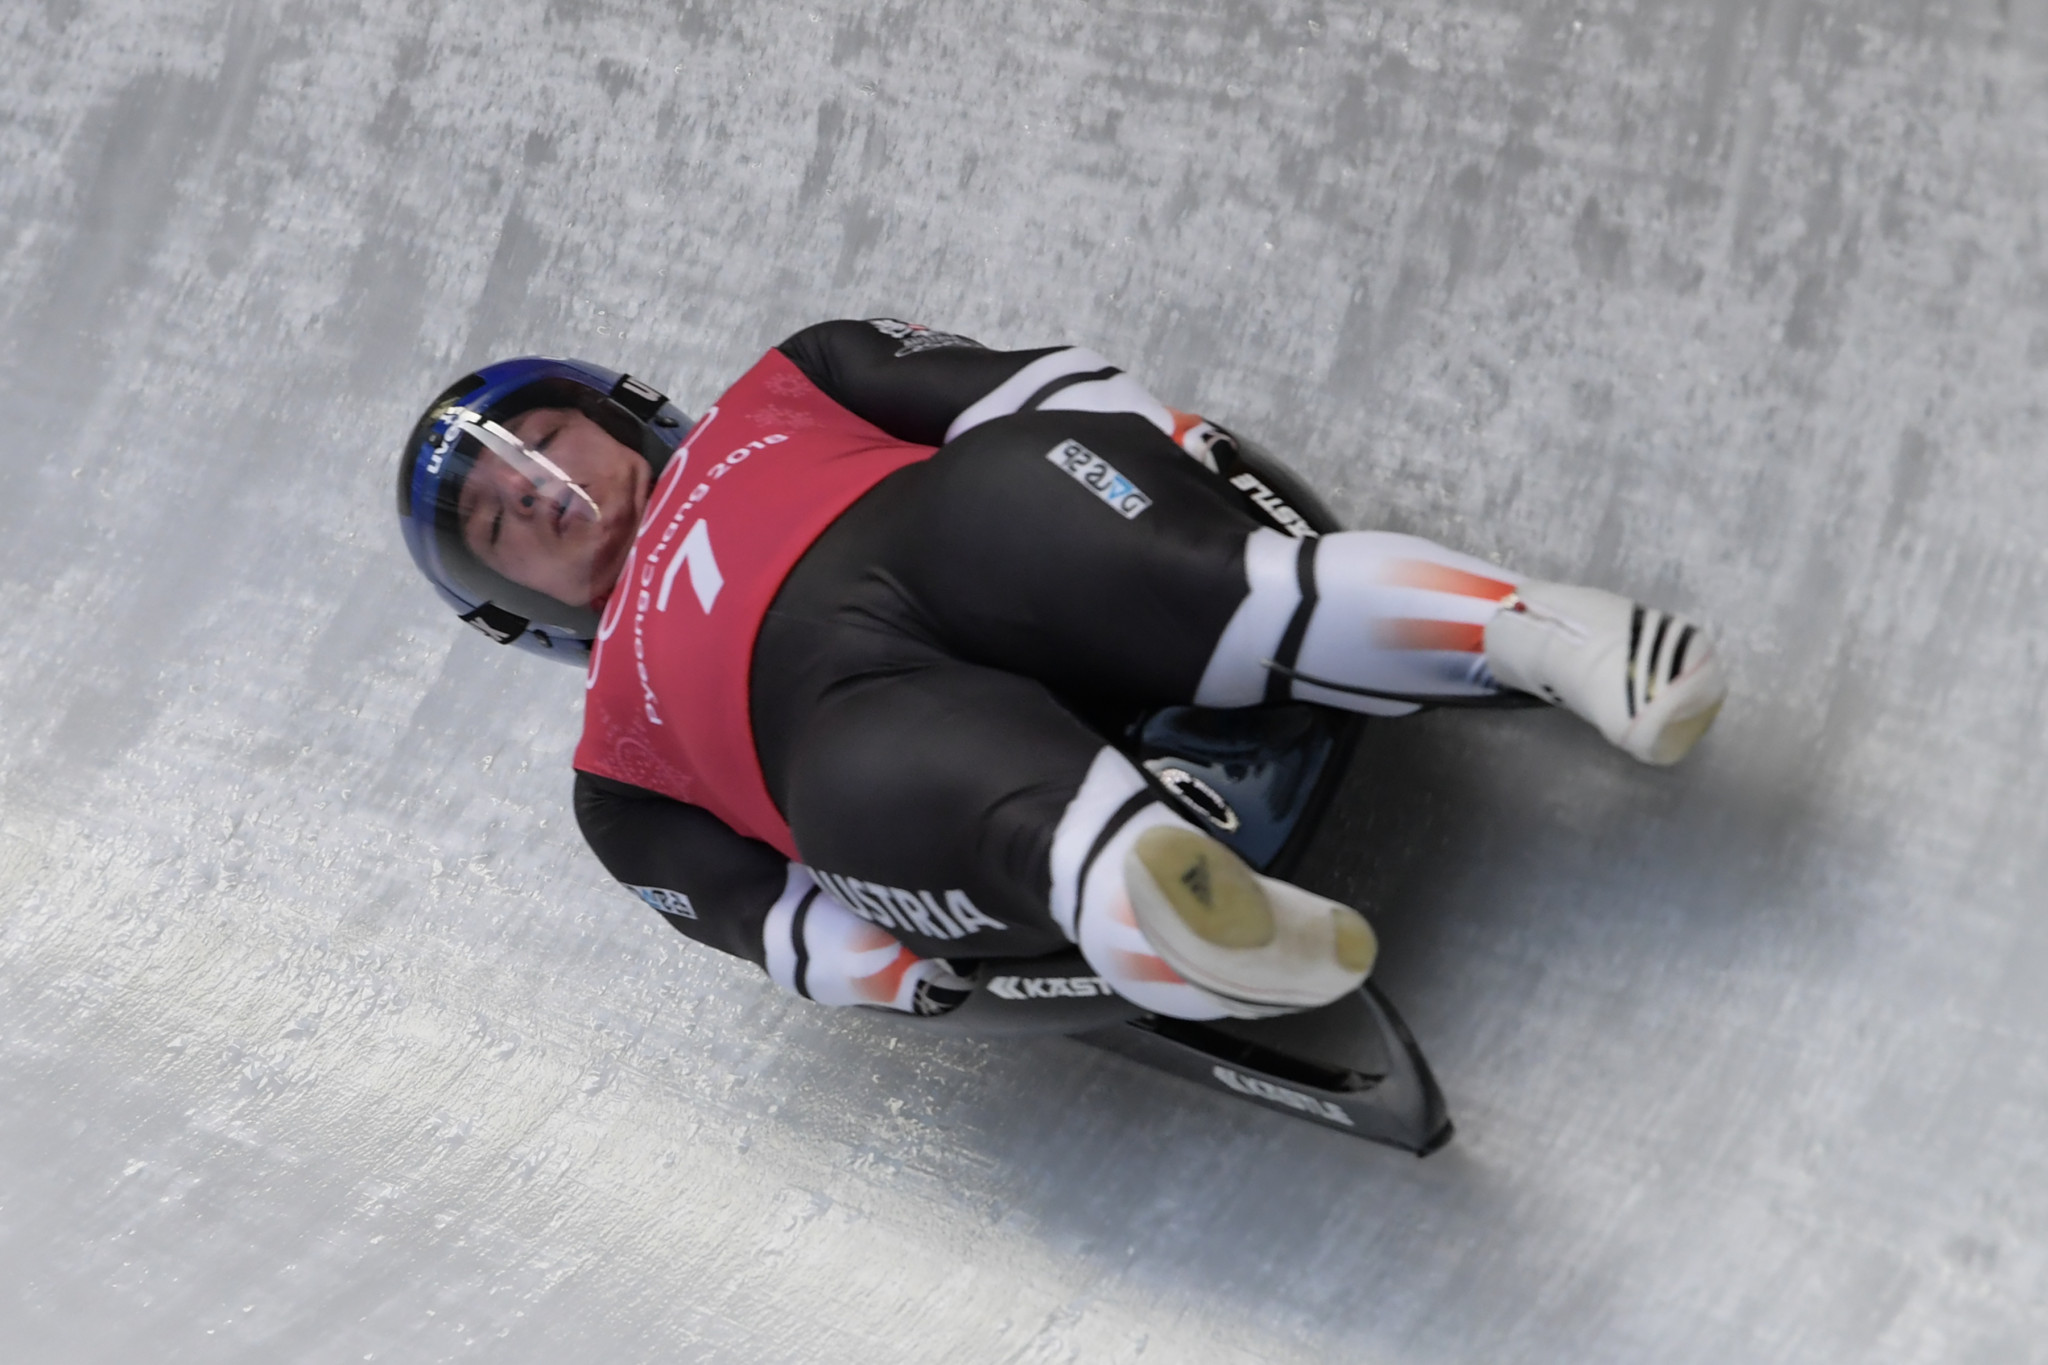 Austrian Wolfgang Kindl set a track record on his way to sealing gold in the men's singles event at the Luge World Cup in Whistler ©Getty Images